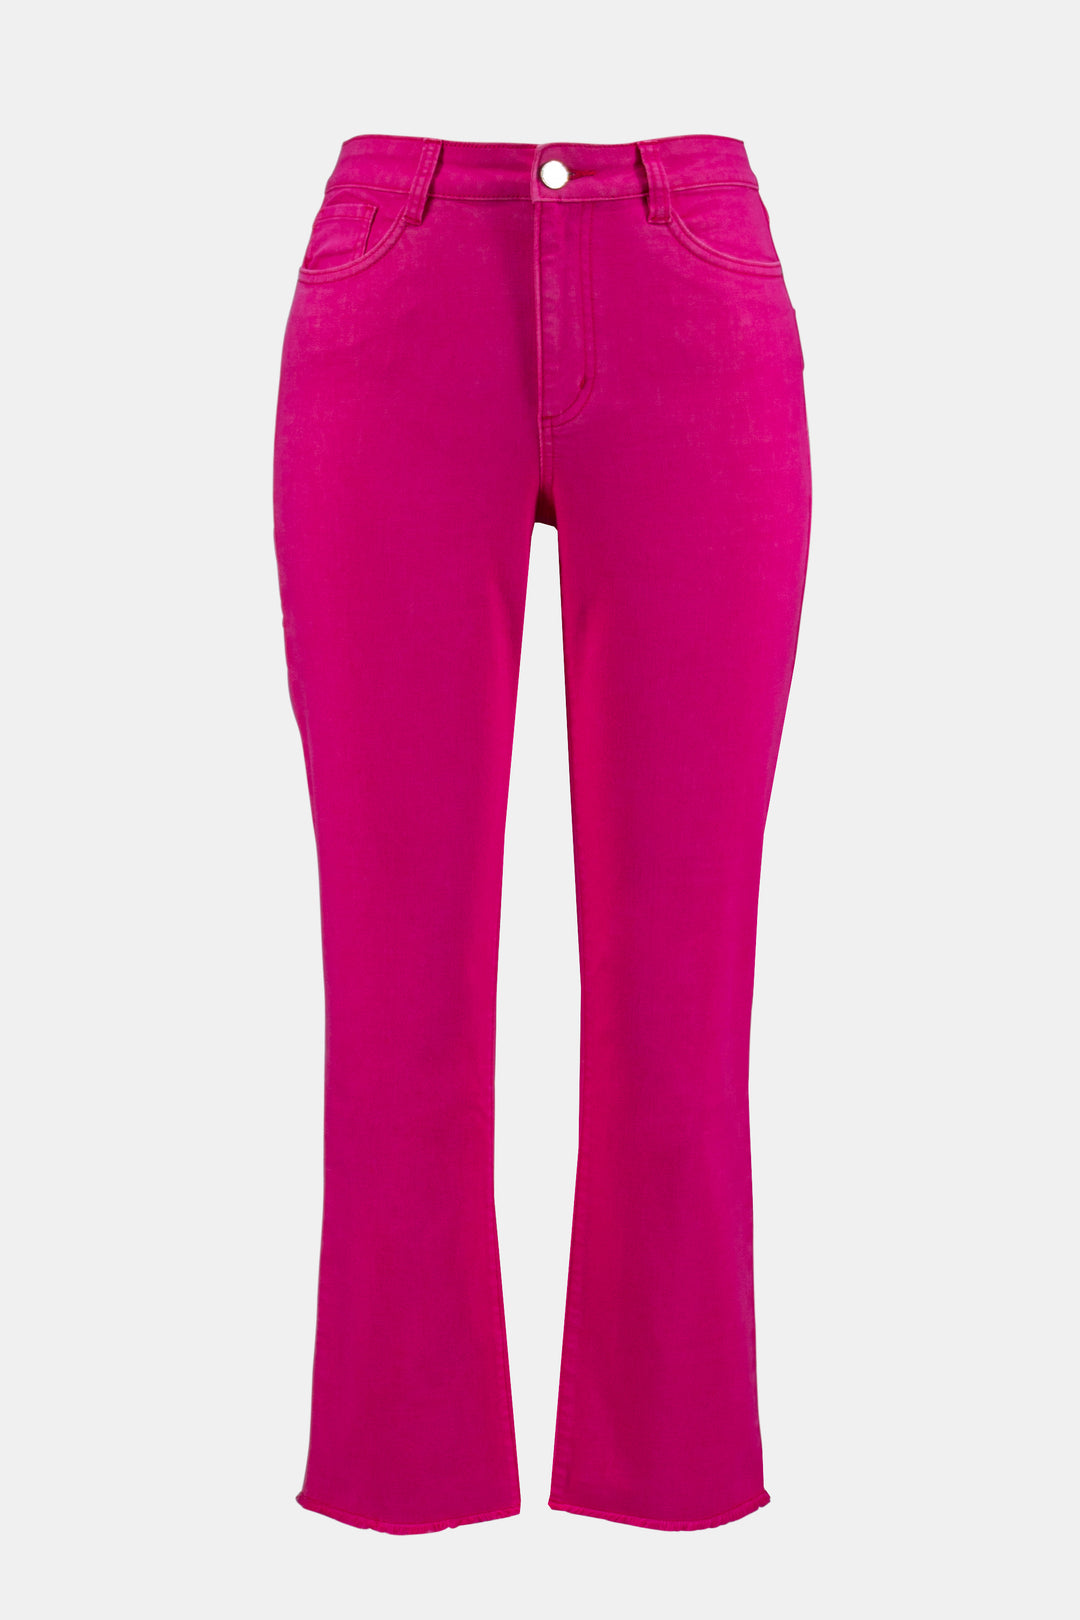 JOSEPH RIBKOFF SPRING 2023 women's casual colourful slim cropped jeans - pink product front